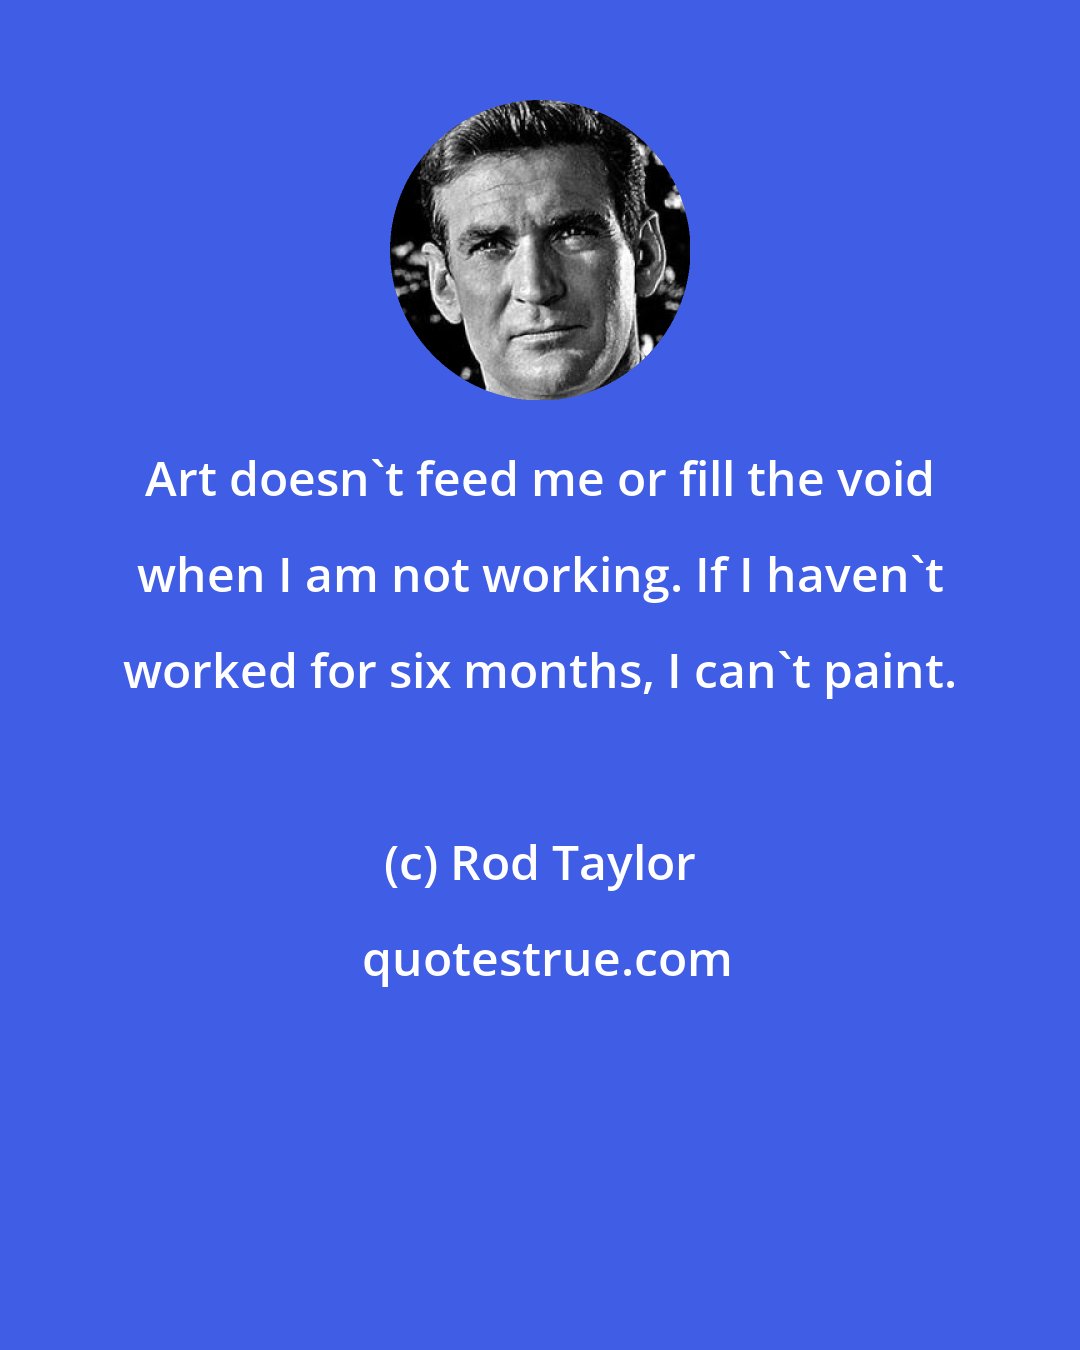 Rod Taylor: Art doesn't feed me or fill the void when I am not working. If I haven't worked for six months, I can't paint.